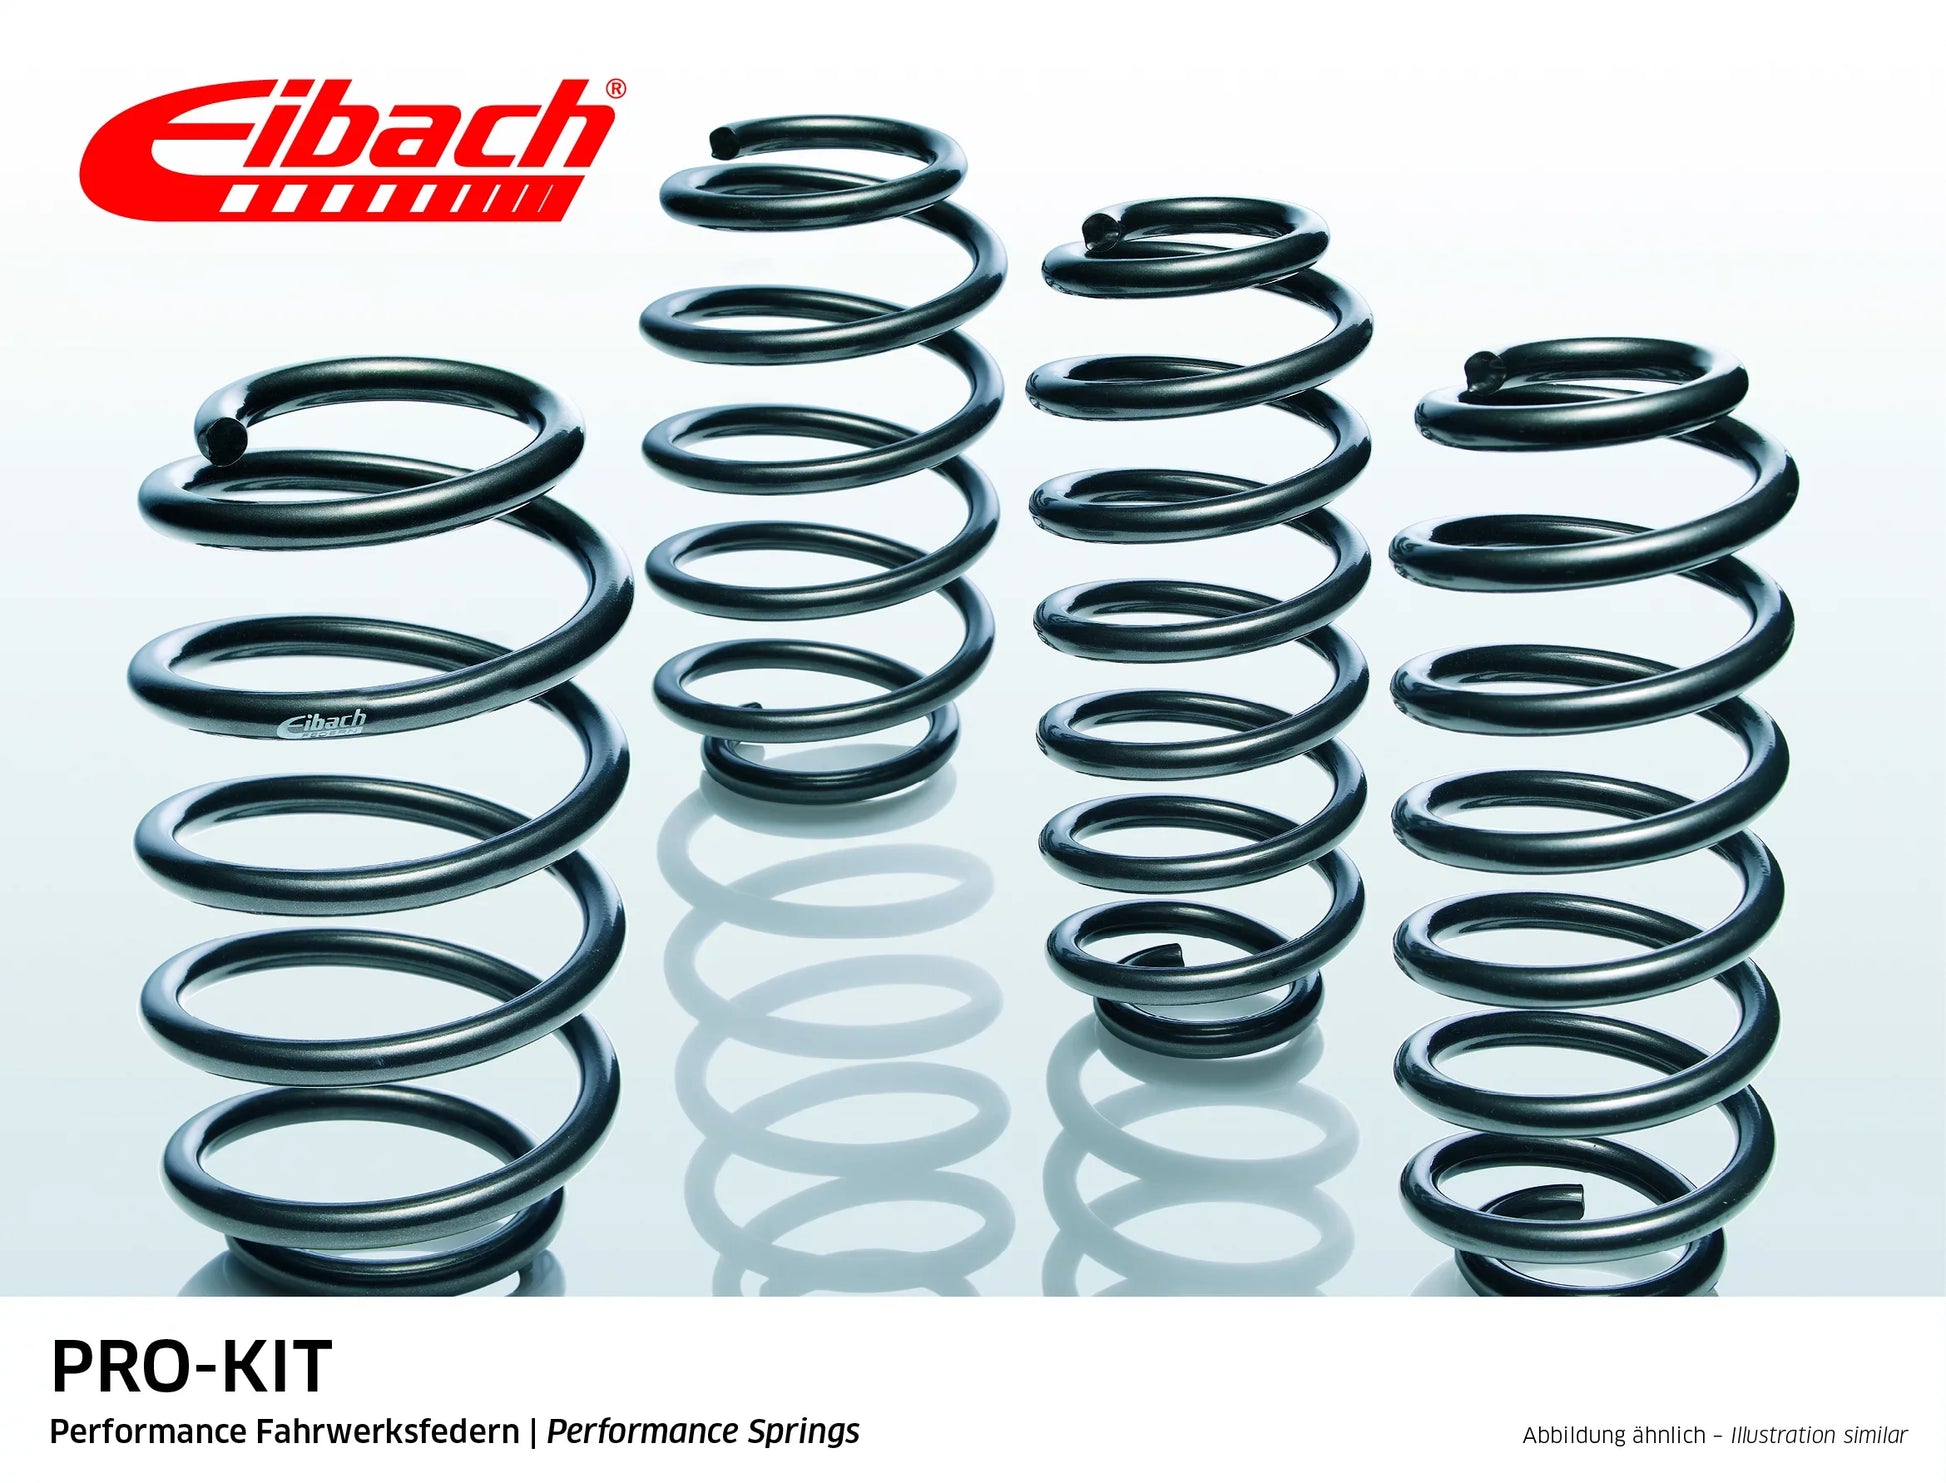 Eibach Pro-Kit Lowering Springs (E1521-140) at £244.80